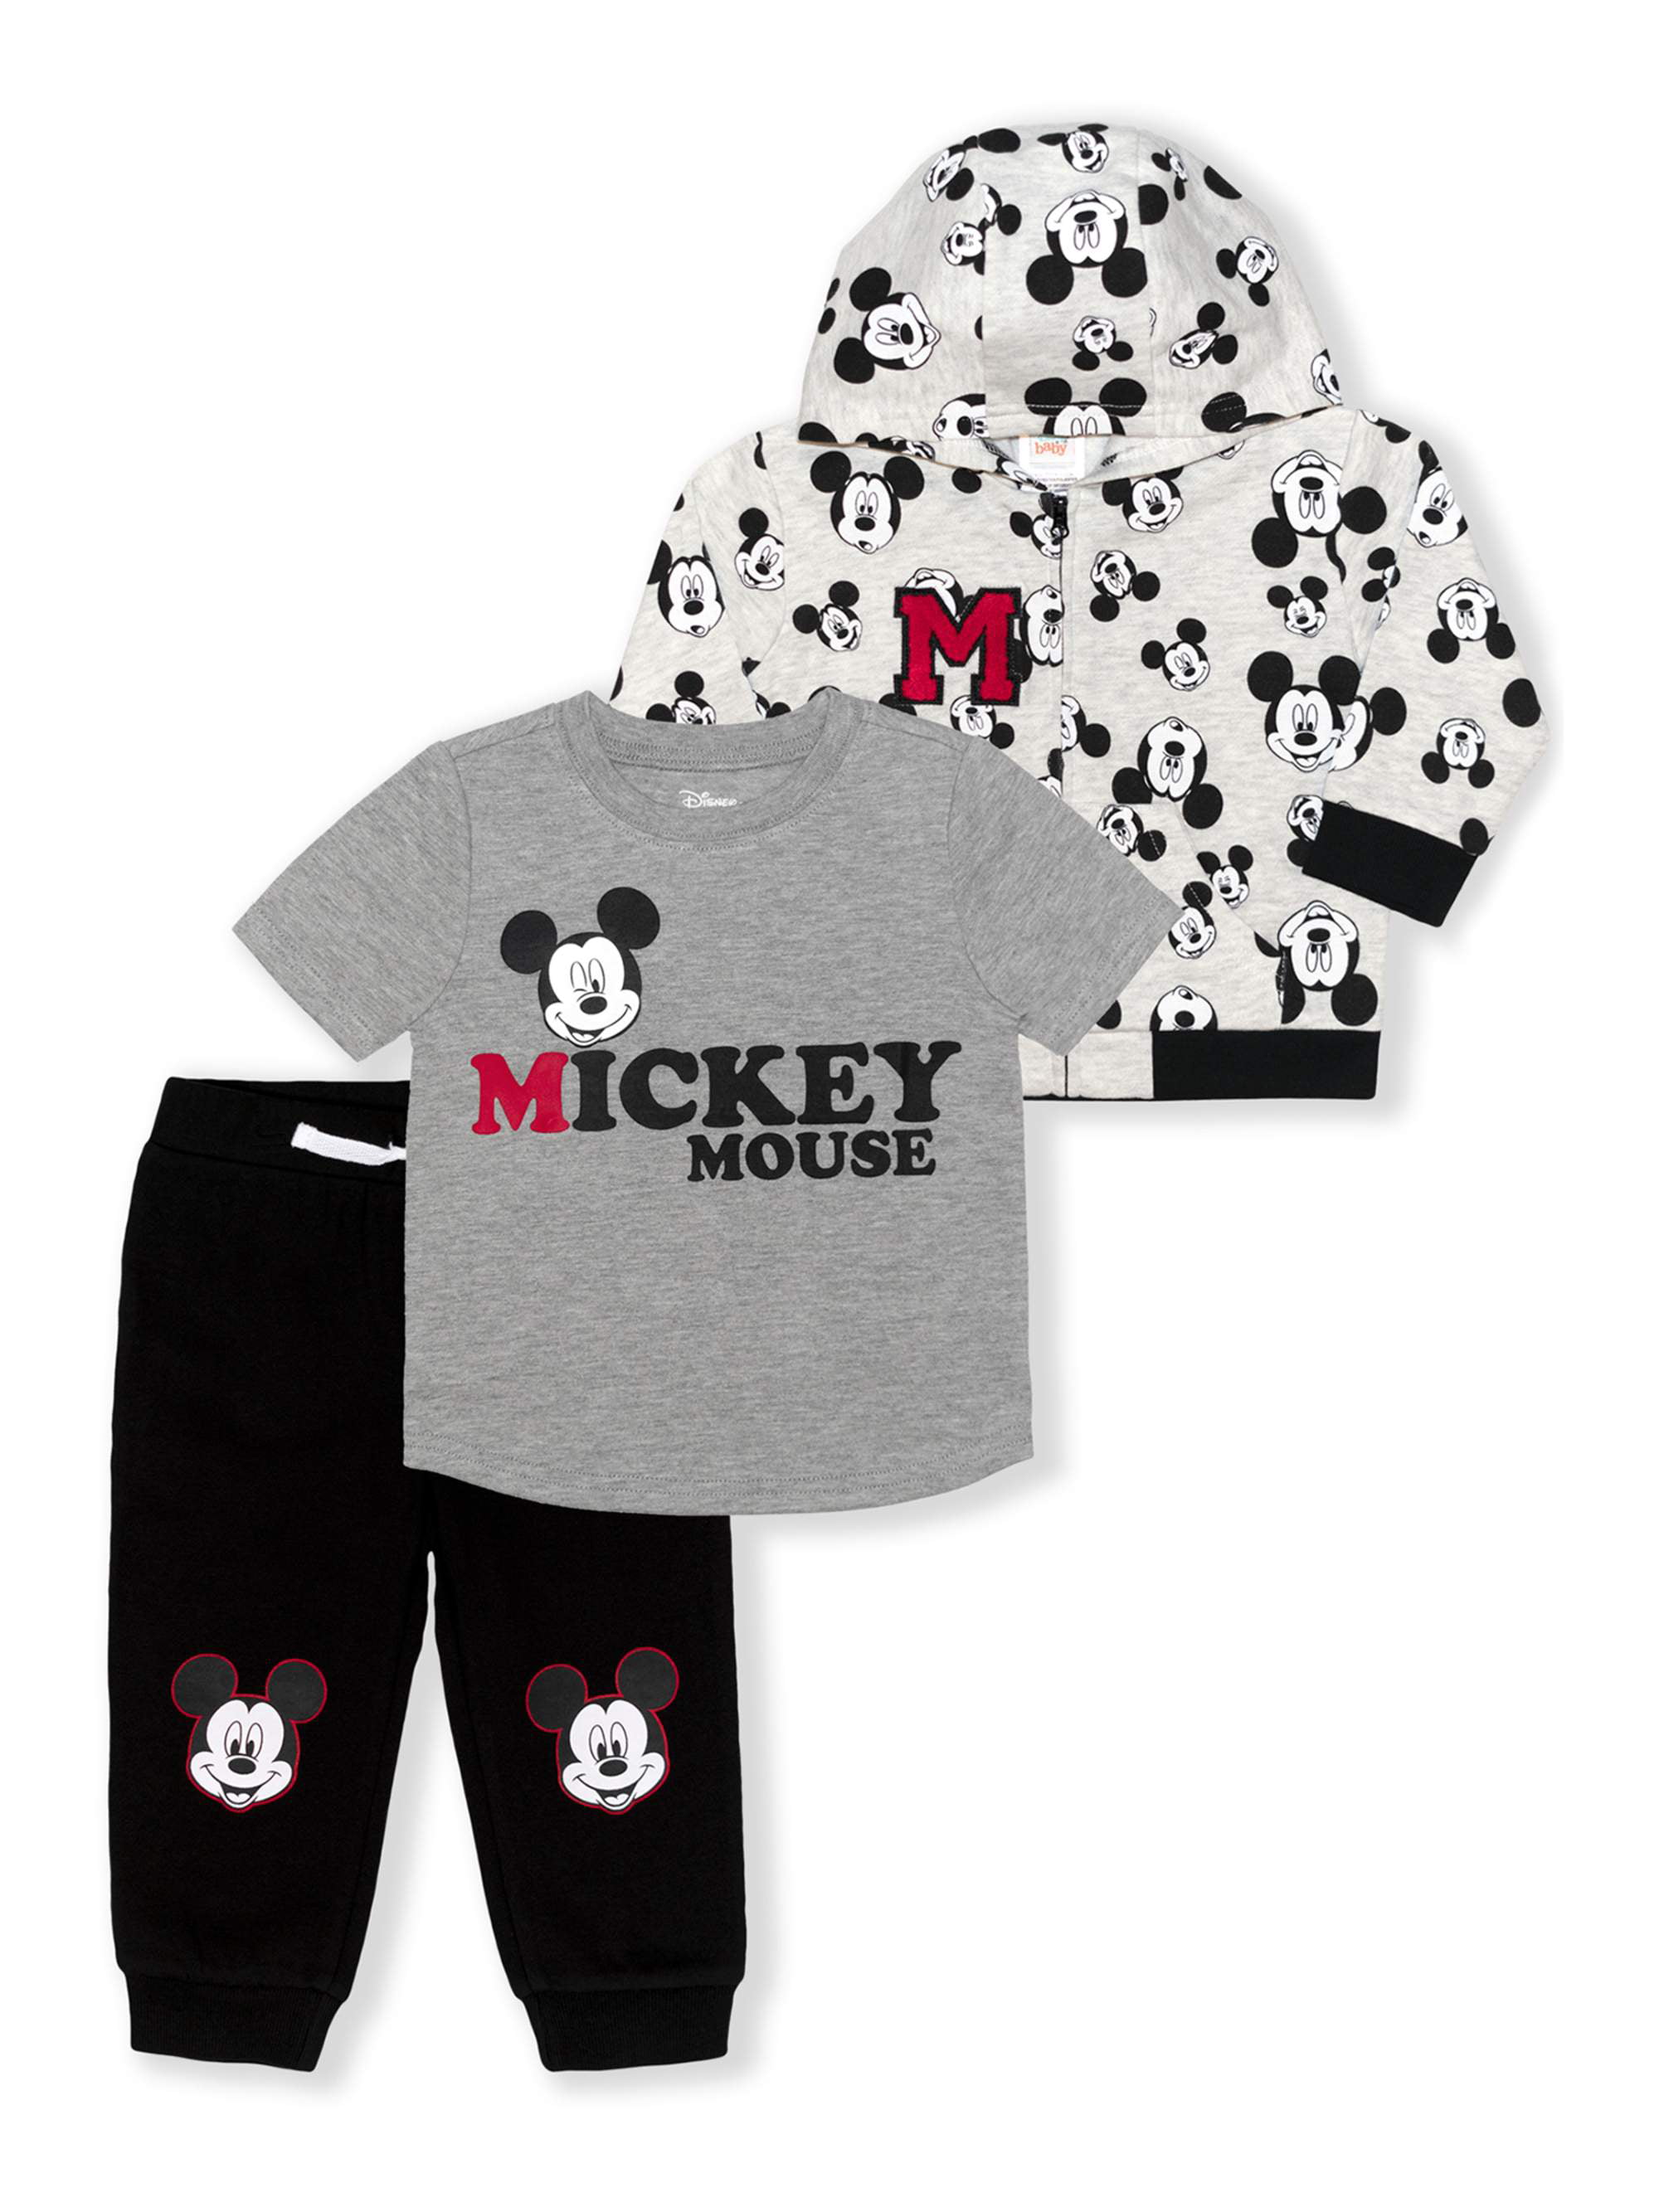 3pc Toddler baby boys Girls Mickey Outfit Hooded coat+T shirt+pants clothes set 